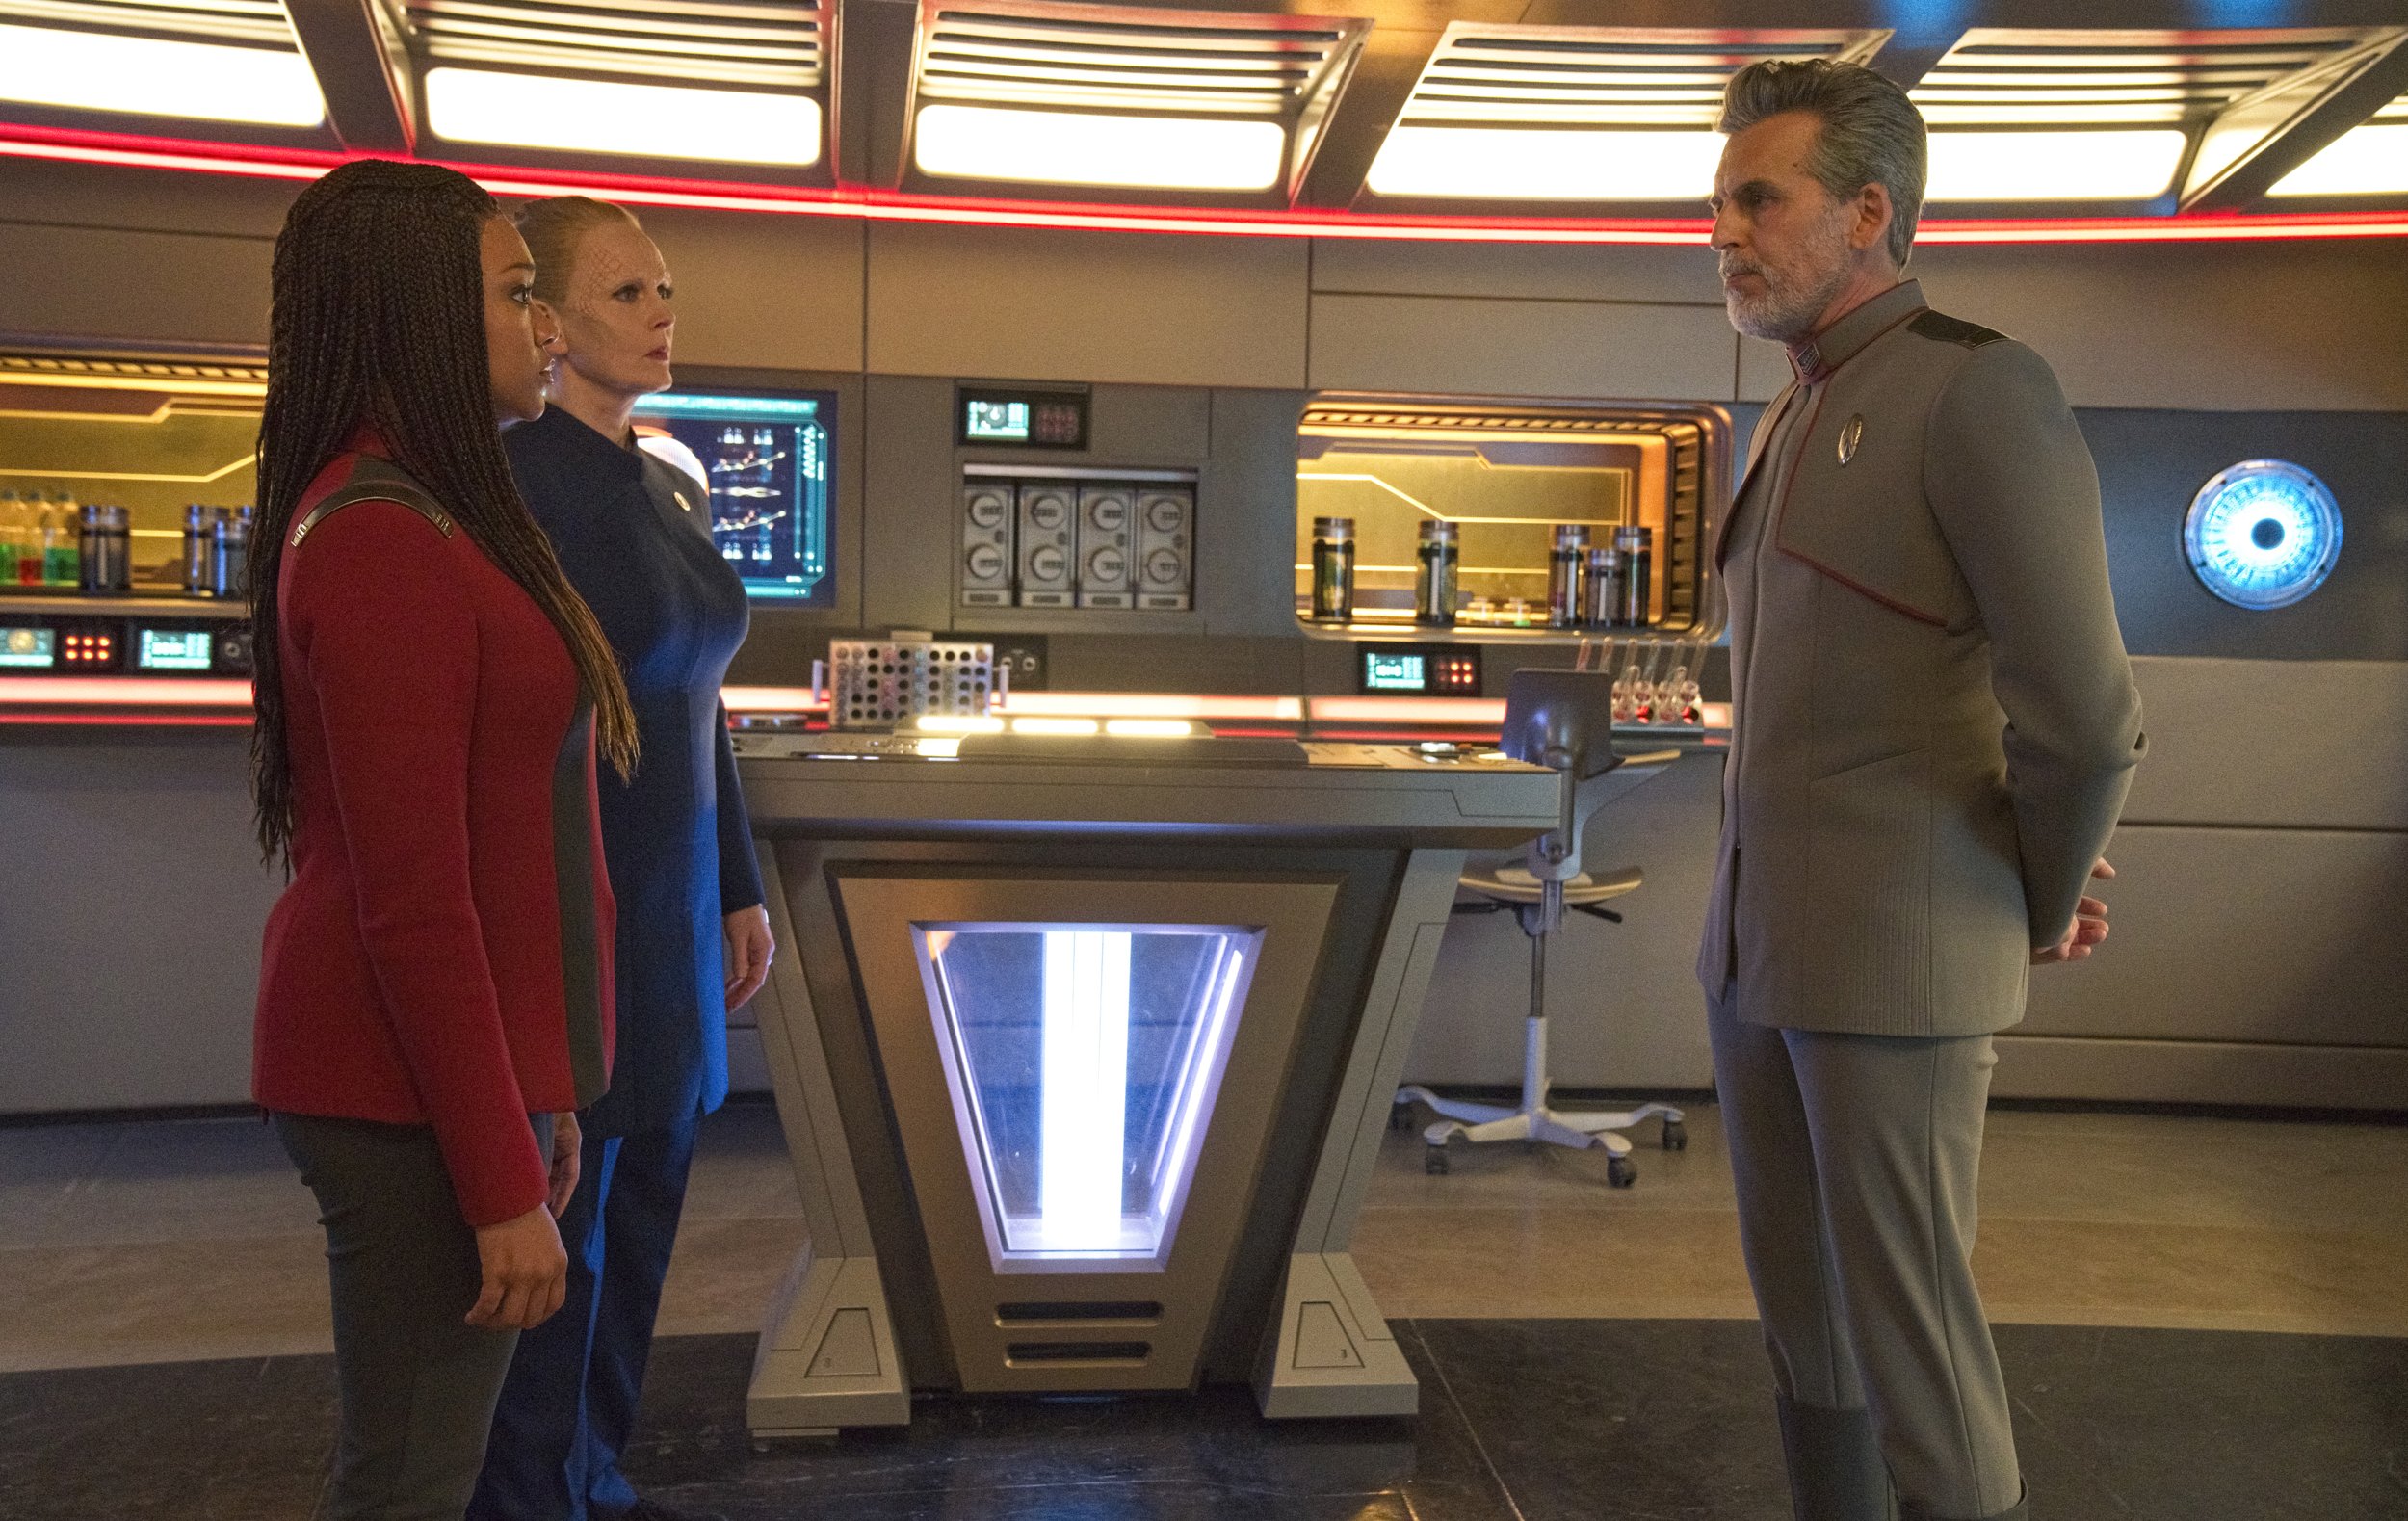   Pictured: Sonequa Martin Green as Burnham, Chelah Horsdal as President Laira Rillak and Oded Fehr as Admiral Vance of the Paramount+ original series STAR TREK: DISCOVERY. Photo Cr: Michael Gibson/Paramount+ (C) 2021 CBS Interactive. All Rights Rese